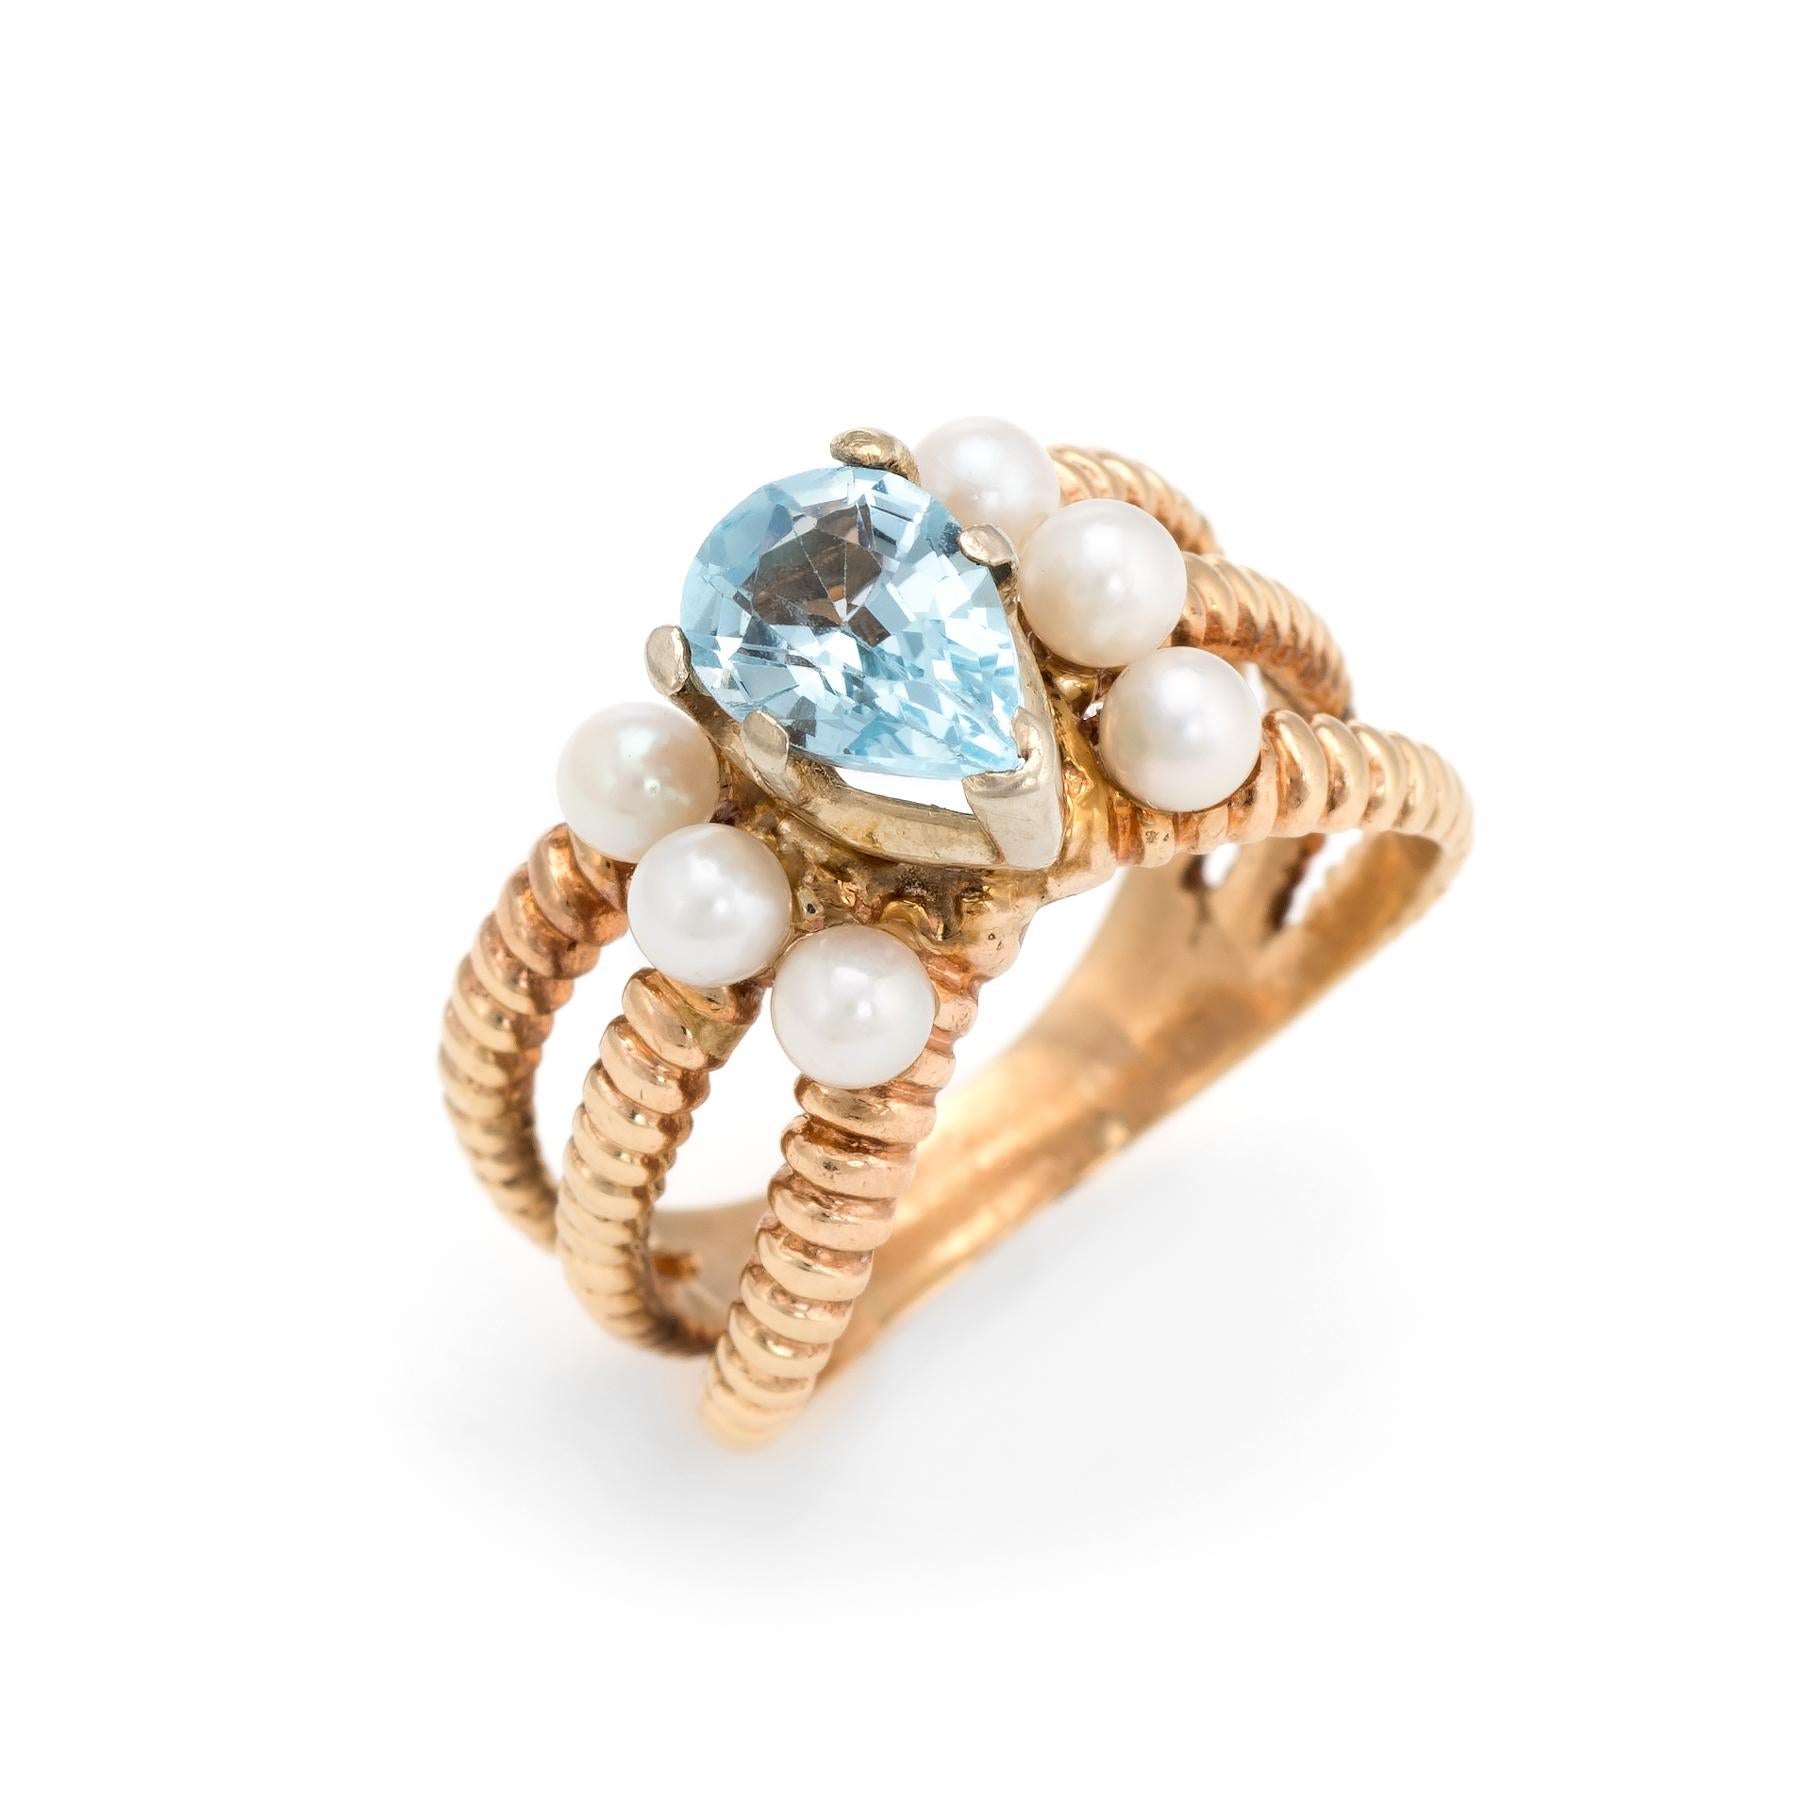 Distinct & stylish blue topaz & cultured pearl cocktail ring (circa 1960s to 1970s), crafted in 14 karat yellow gold. 

Faceted pear cut blue topaz measures 9mm x 7mm (estimated at 1.50 carats), accented with six 3.5mm cultured pearls. The topaz is